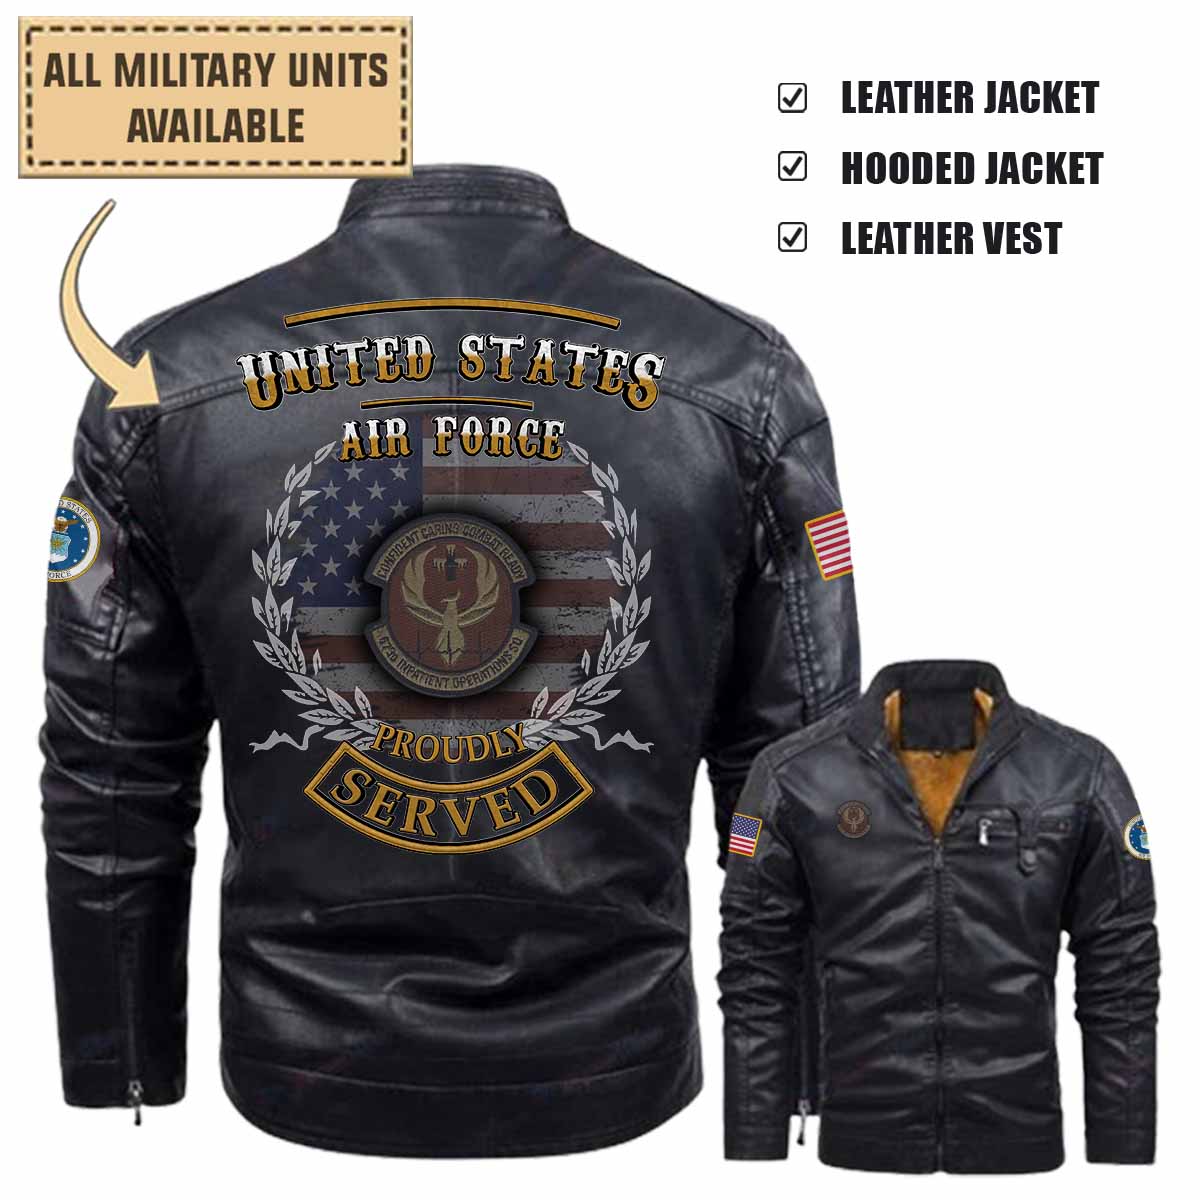 673d inpatient operations squadronleather jacket and vest